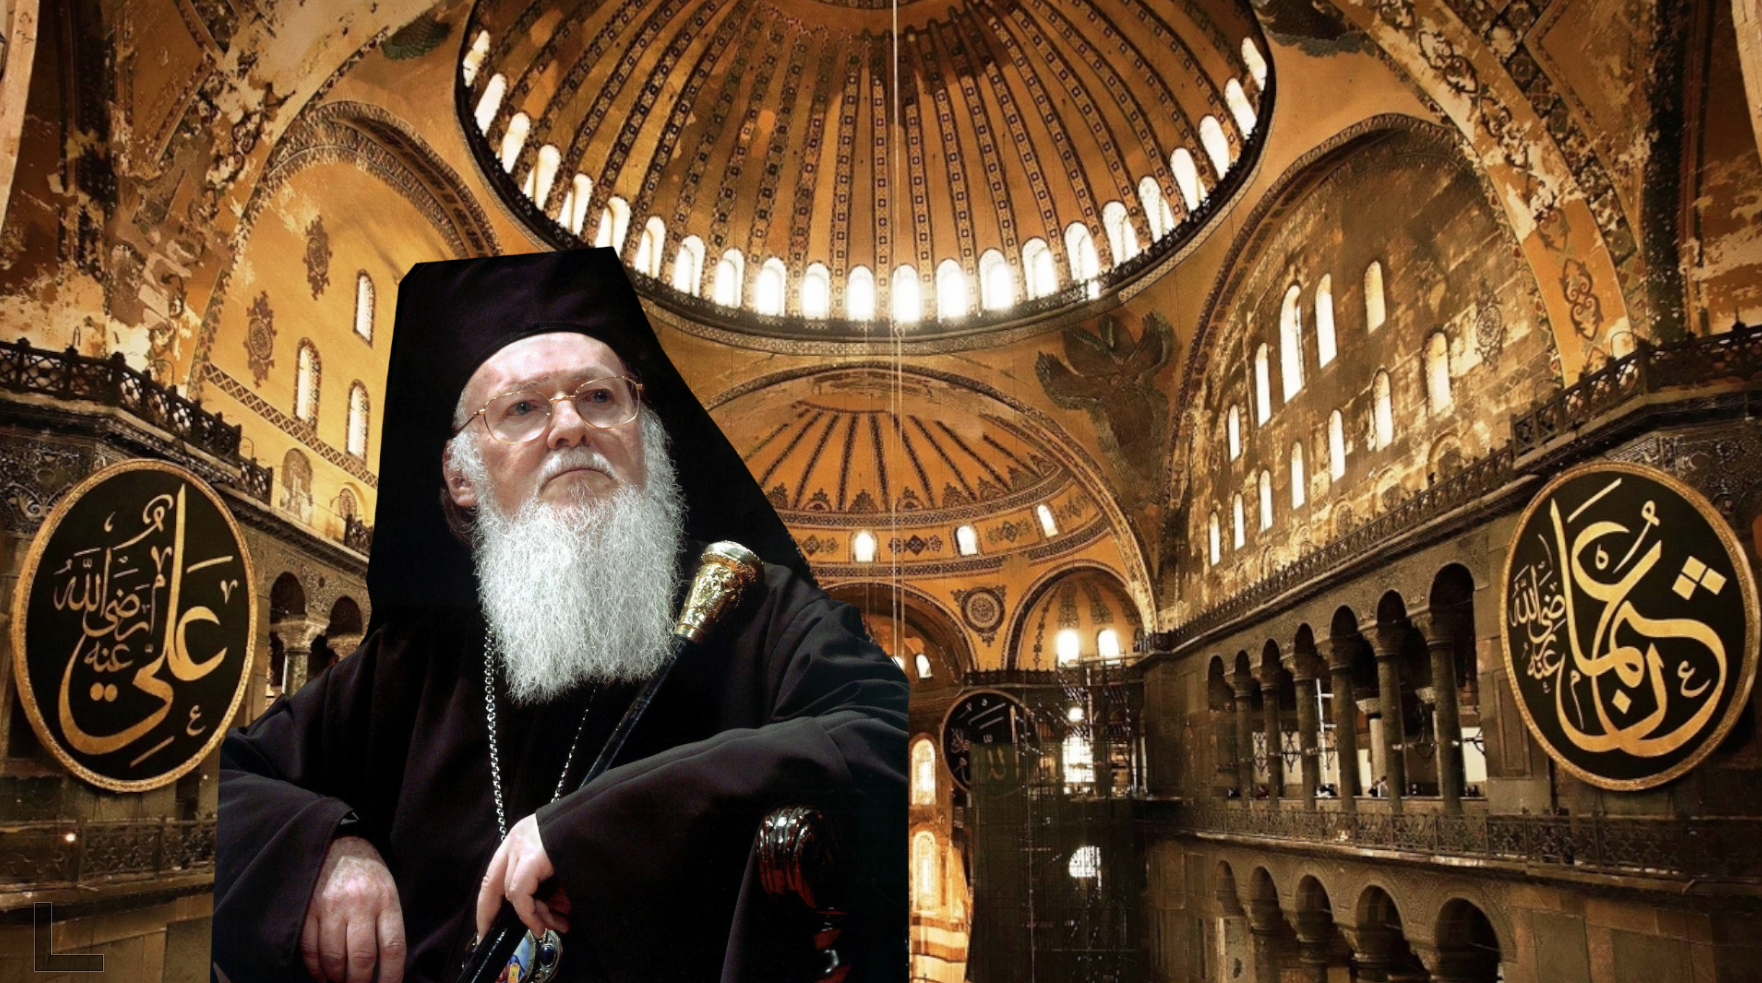 Should the “Head of Orthodoxy” defend Orthodox shrines? фото 2